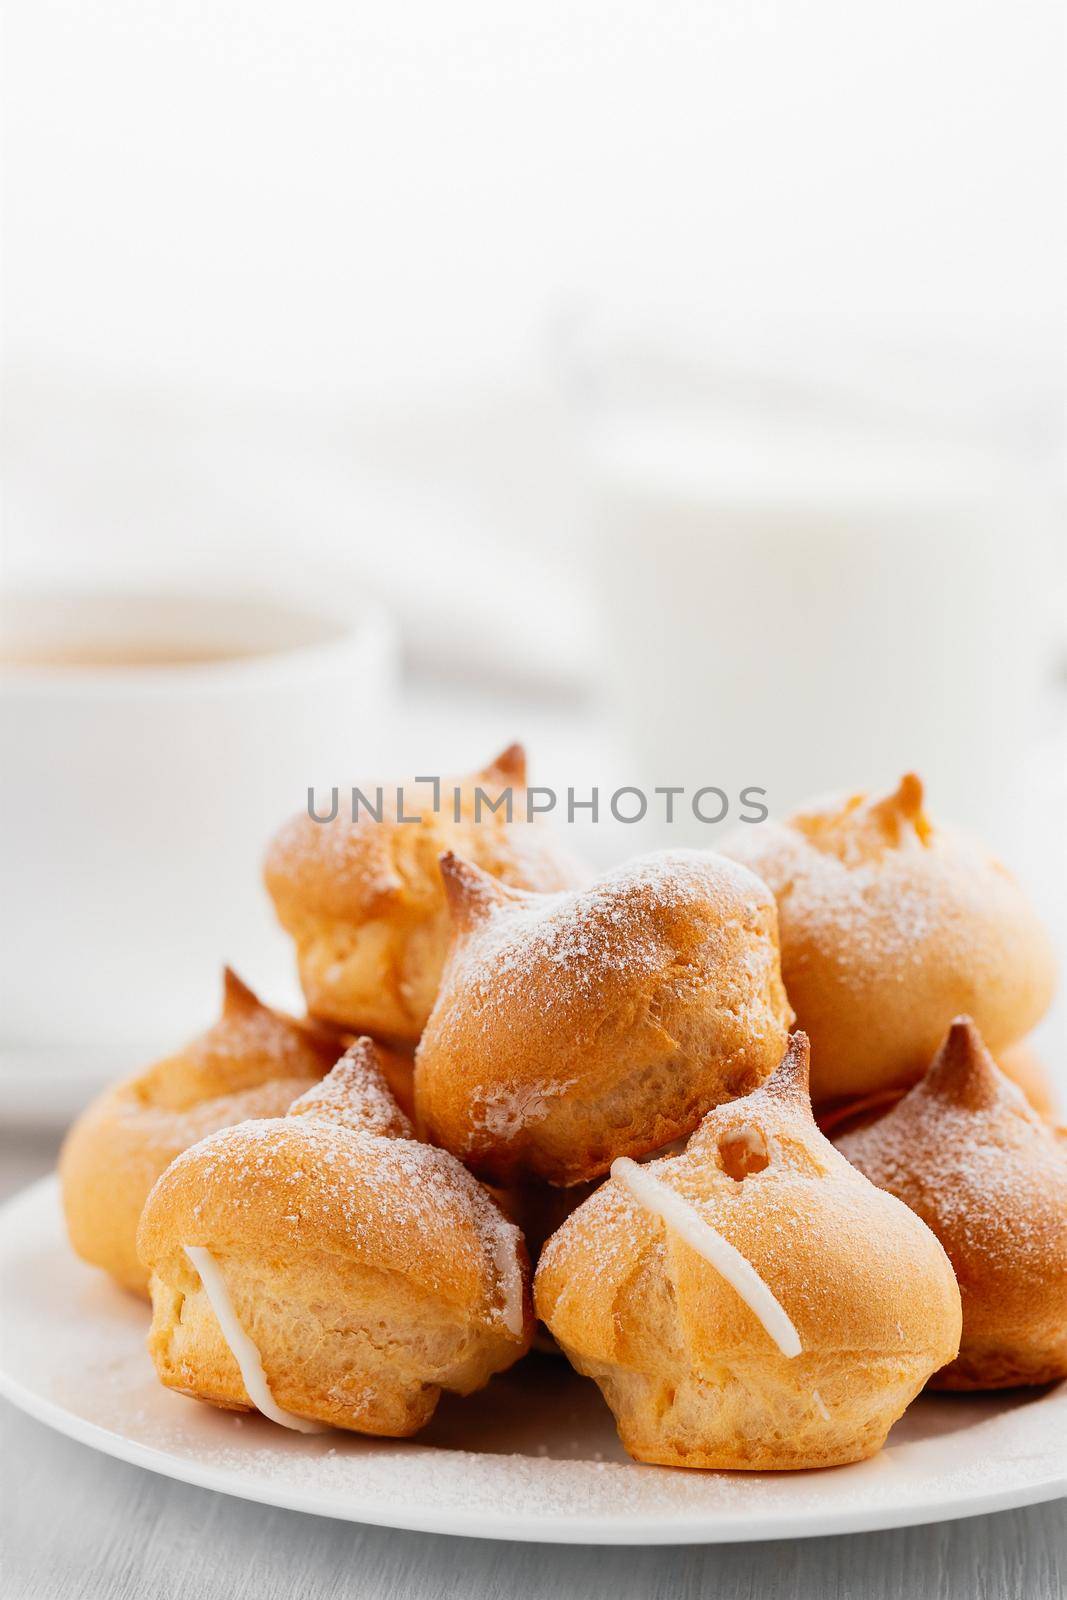 Morning coffee with cakes. Profiteroles, coffee, cream on a white wooden table. Vertical image.